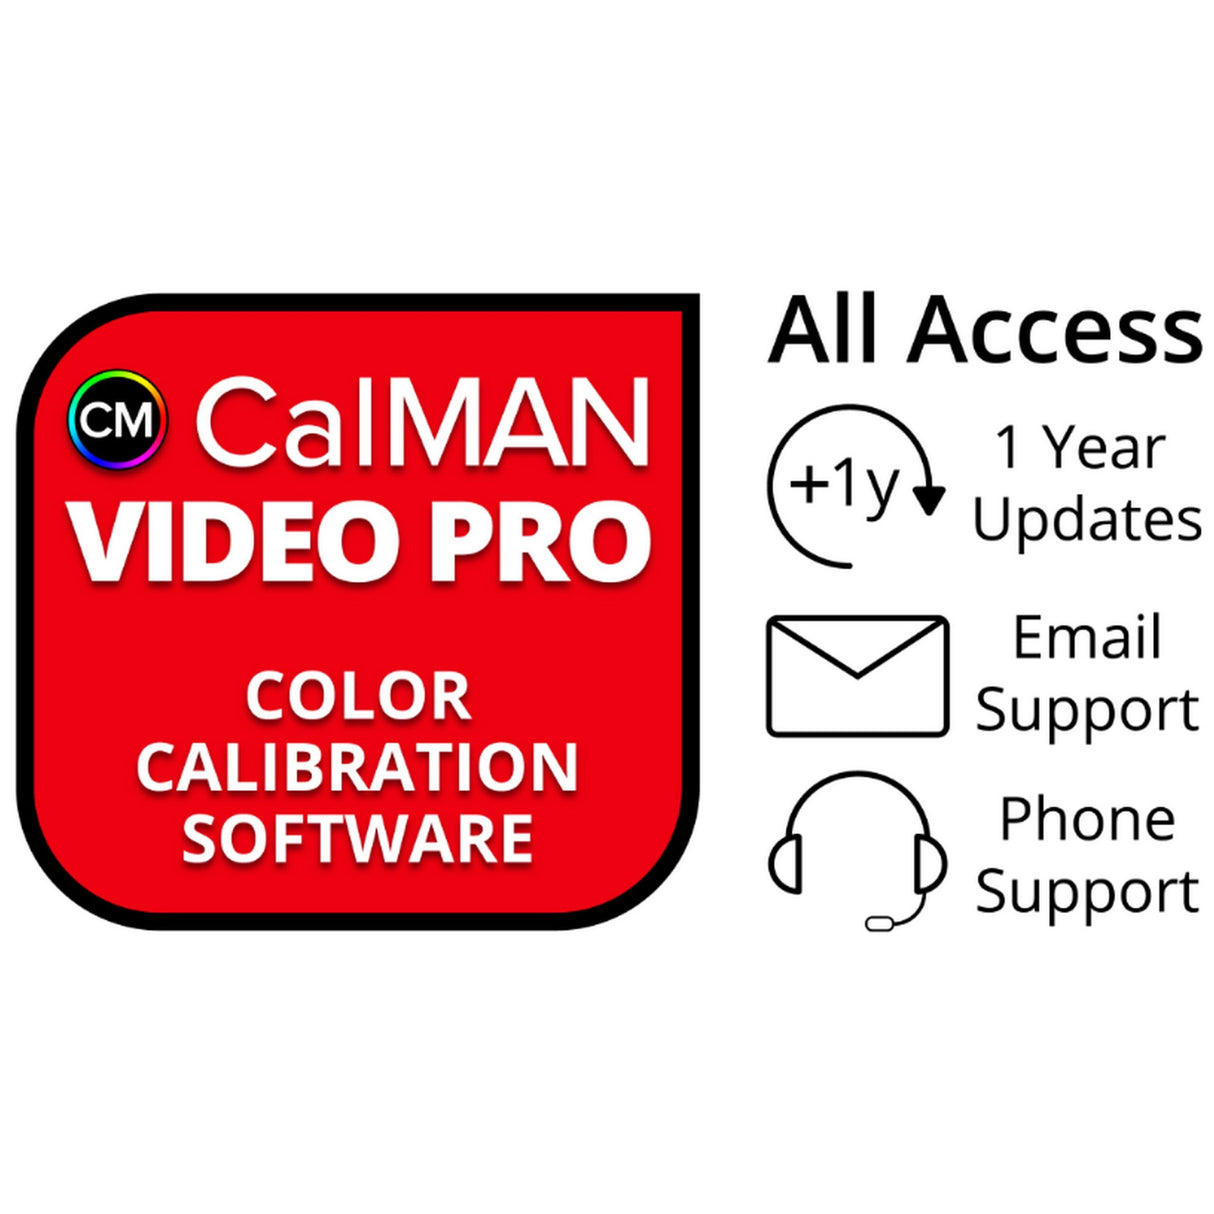 SpectraCal 1-Year All Access License for CalMAN Video Pro